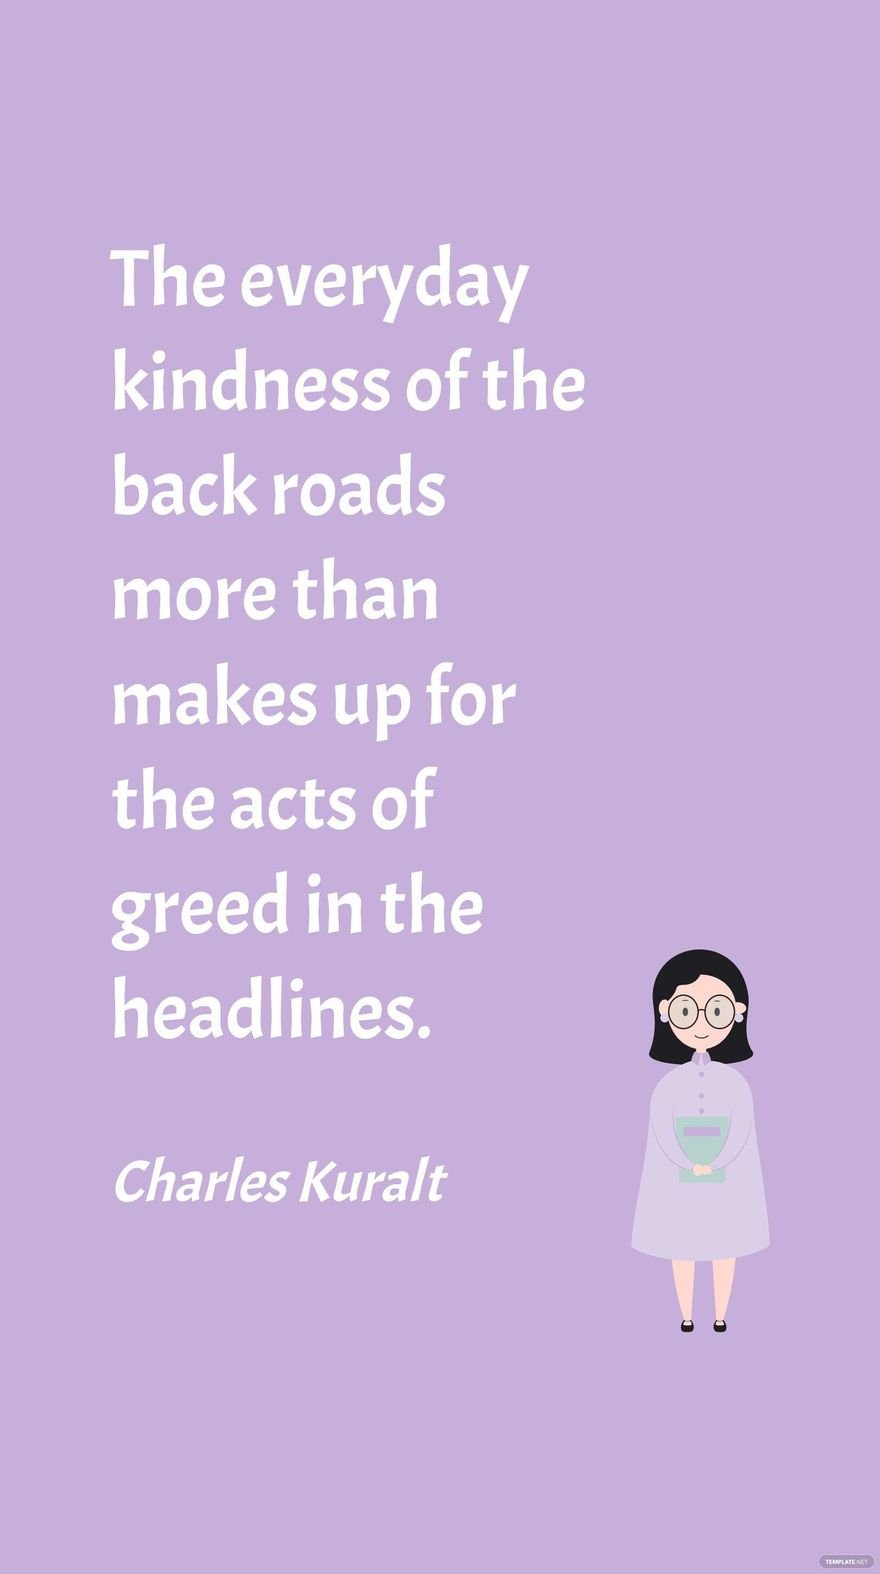 Free Charles Kuralt - The everyday kindness of the back roads more than makes up for the acts of greed in the headlines. in JPG